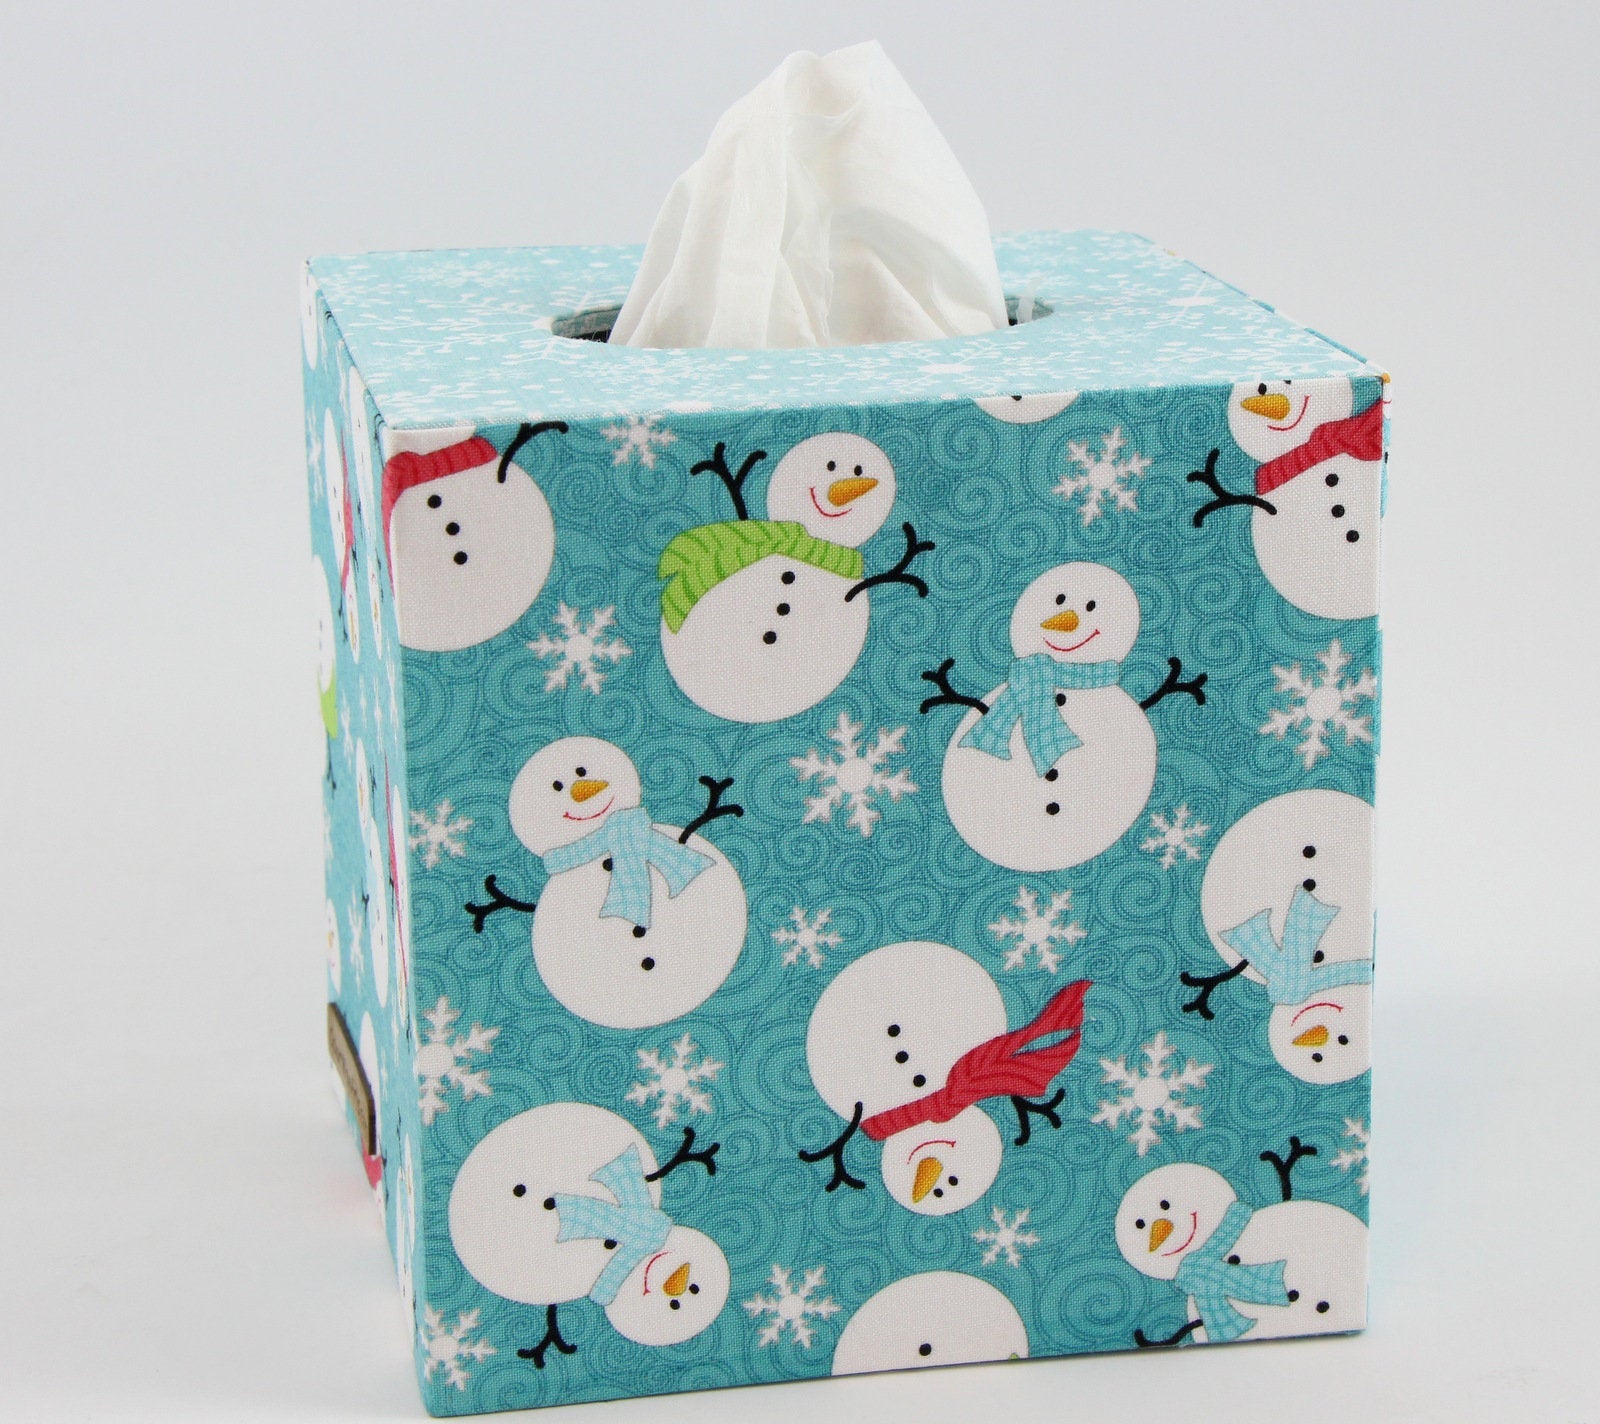 Reversible Tissue Box Cover Tutorial - Complete Step-by-Step Instructions